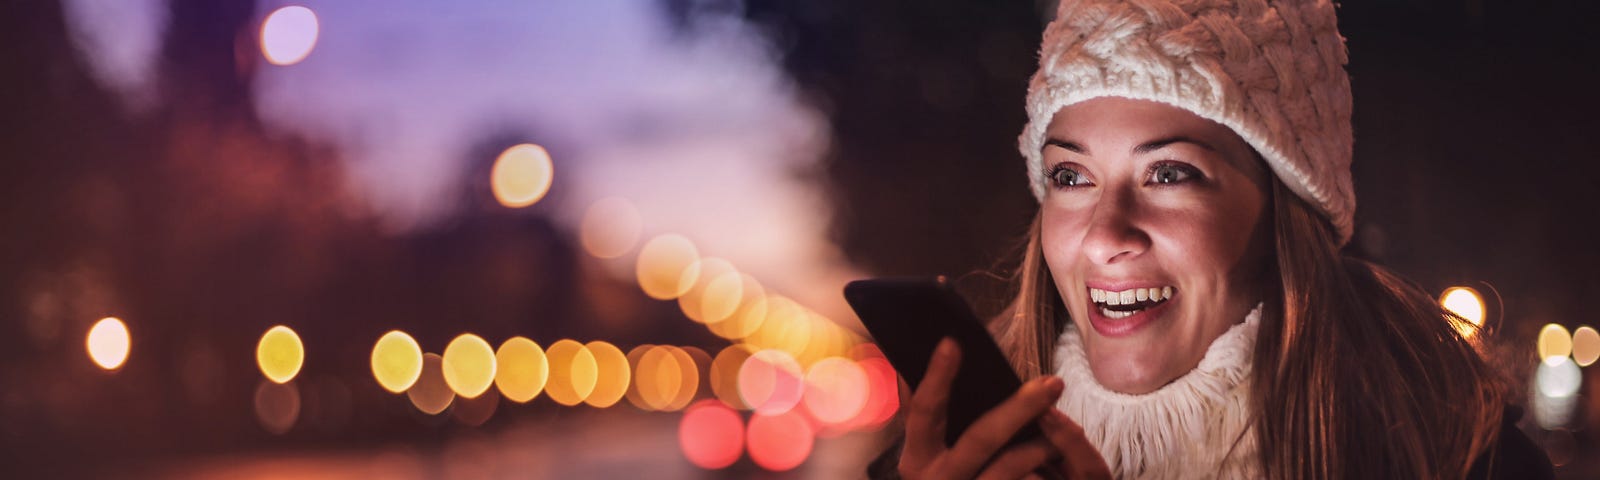 photo of a smiling, young, vibrant woman wearing a knitted woolen hat and chunky, warm textured sweater and warm coat holding her phone in front of her mouth and talking into it, against a backdrop of a blurred city streetscape at dusk.